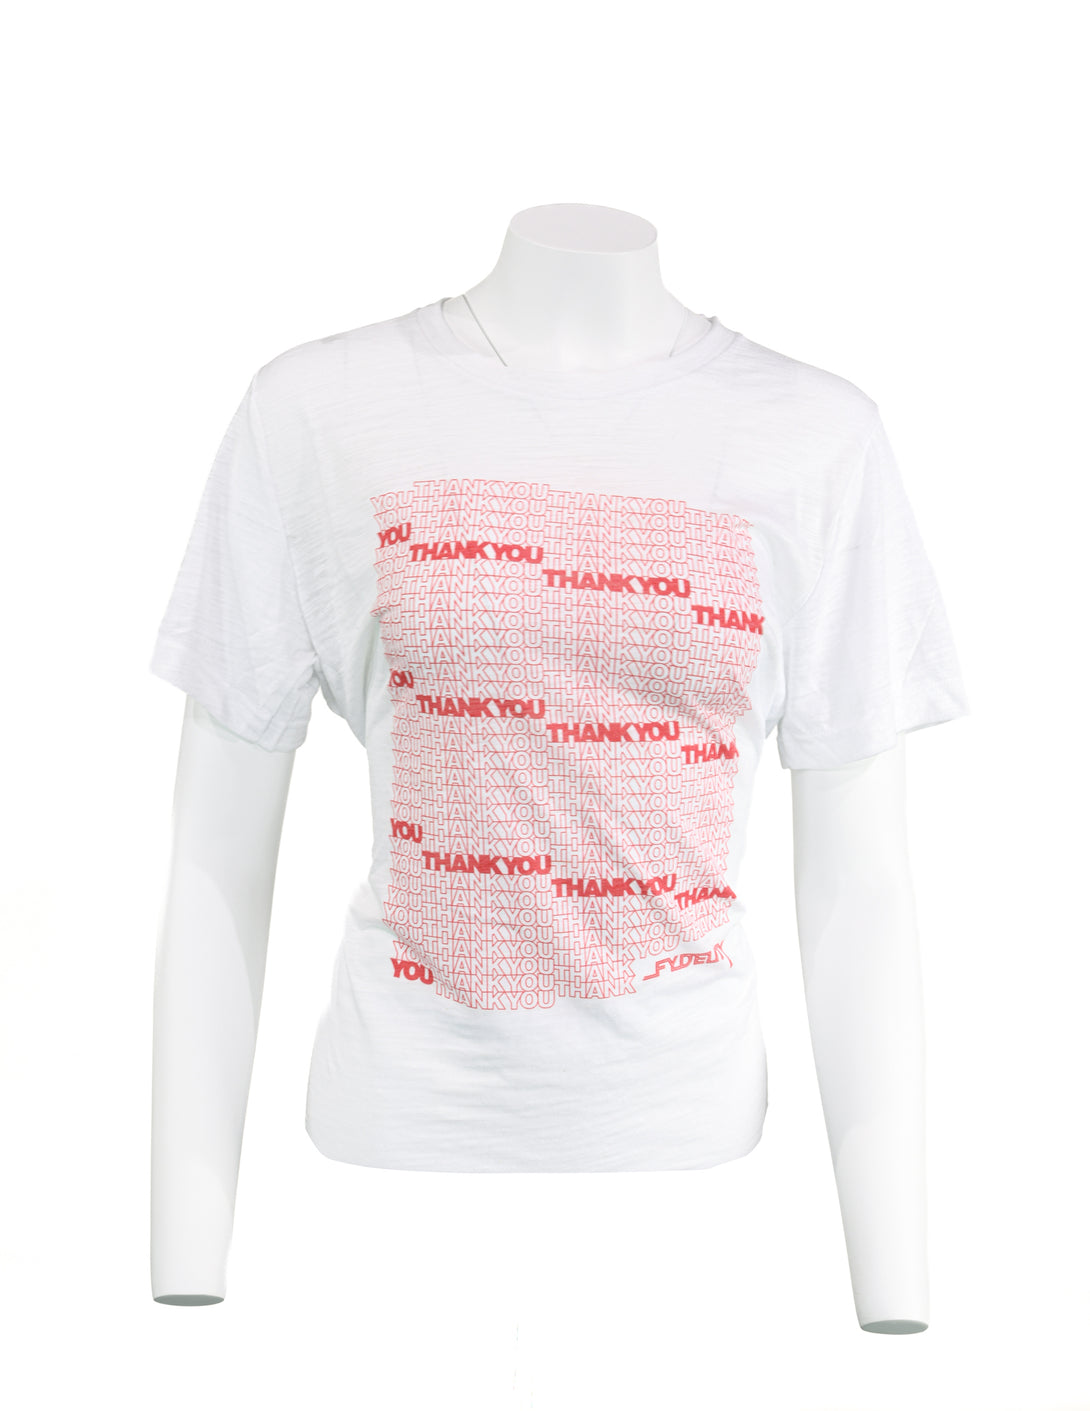 61007: T-Shirt Vintage White | Thank You Repeat